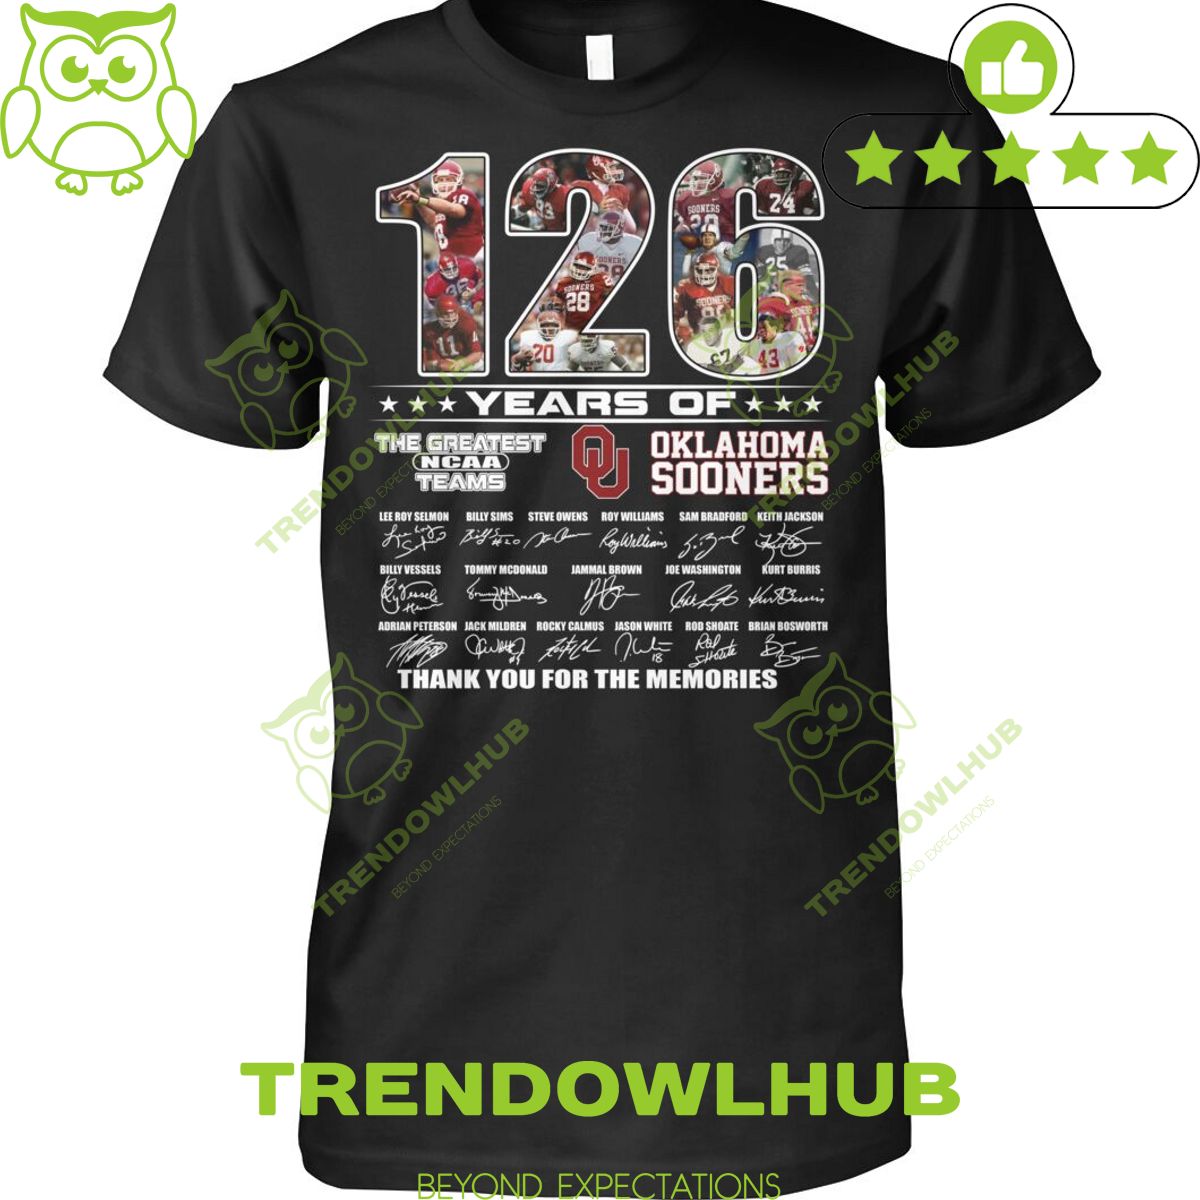 Oklahoma Sooners 126 years of The Greatest NCAA Teams Thank for memories t shirt